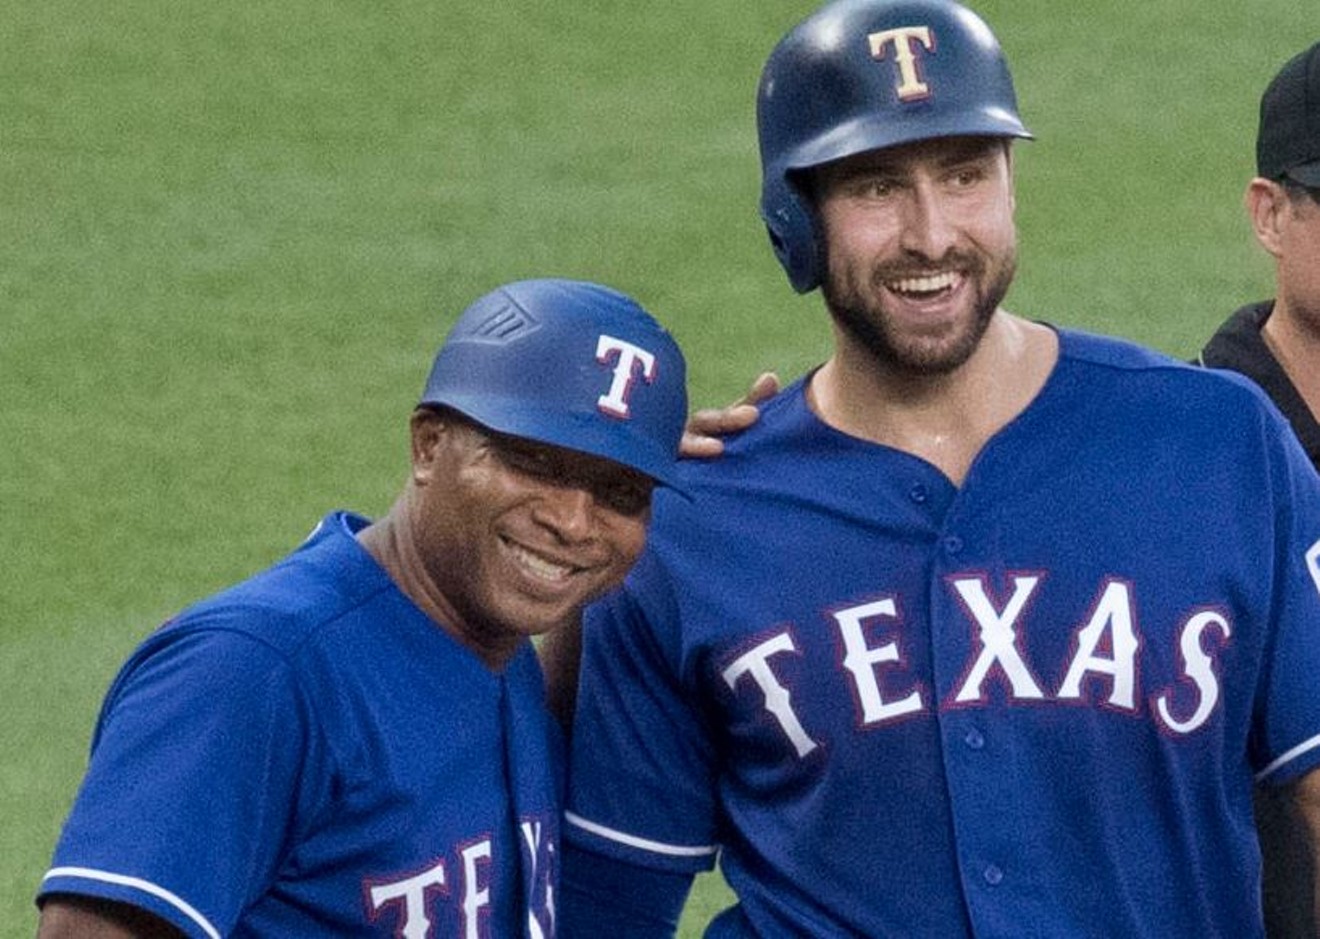 Rangers coach Tony Beasley (left) and Joey Gallo. Expect to see this smile a lot in 2018.